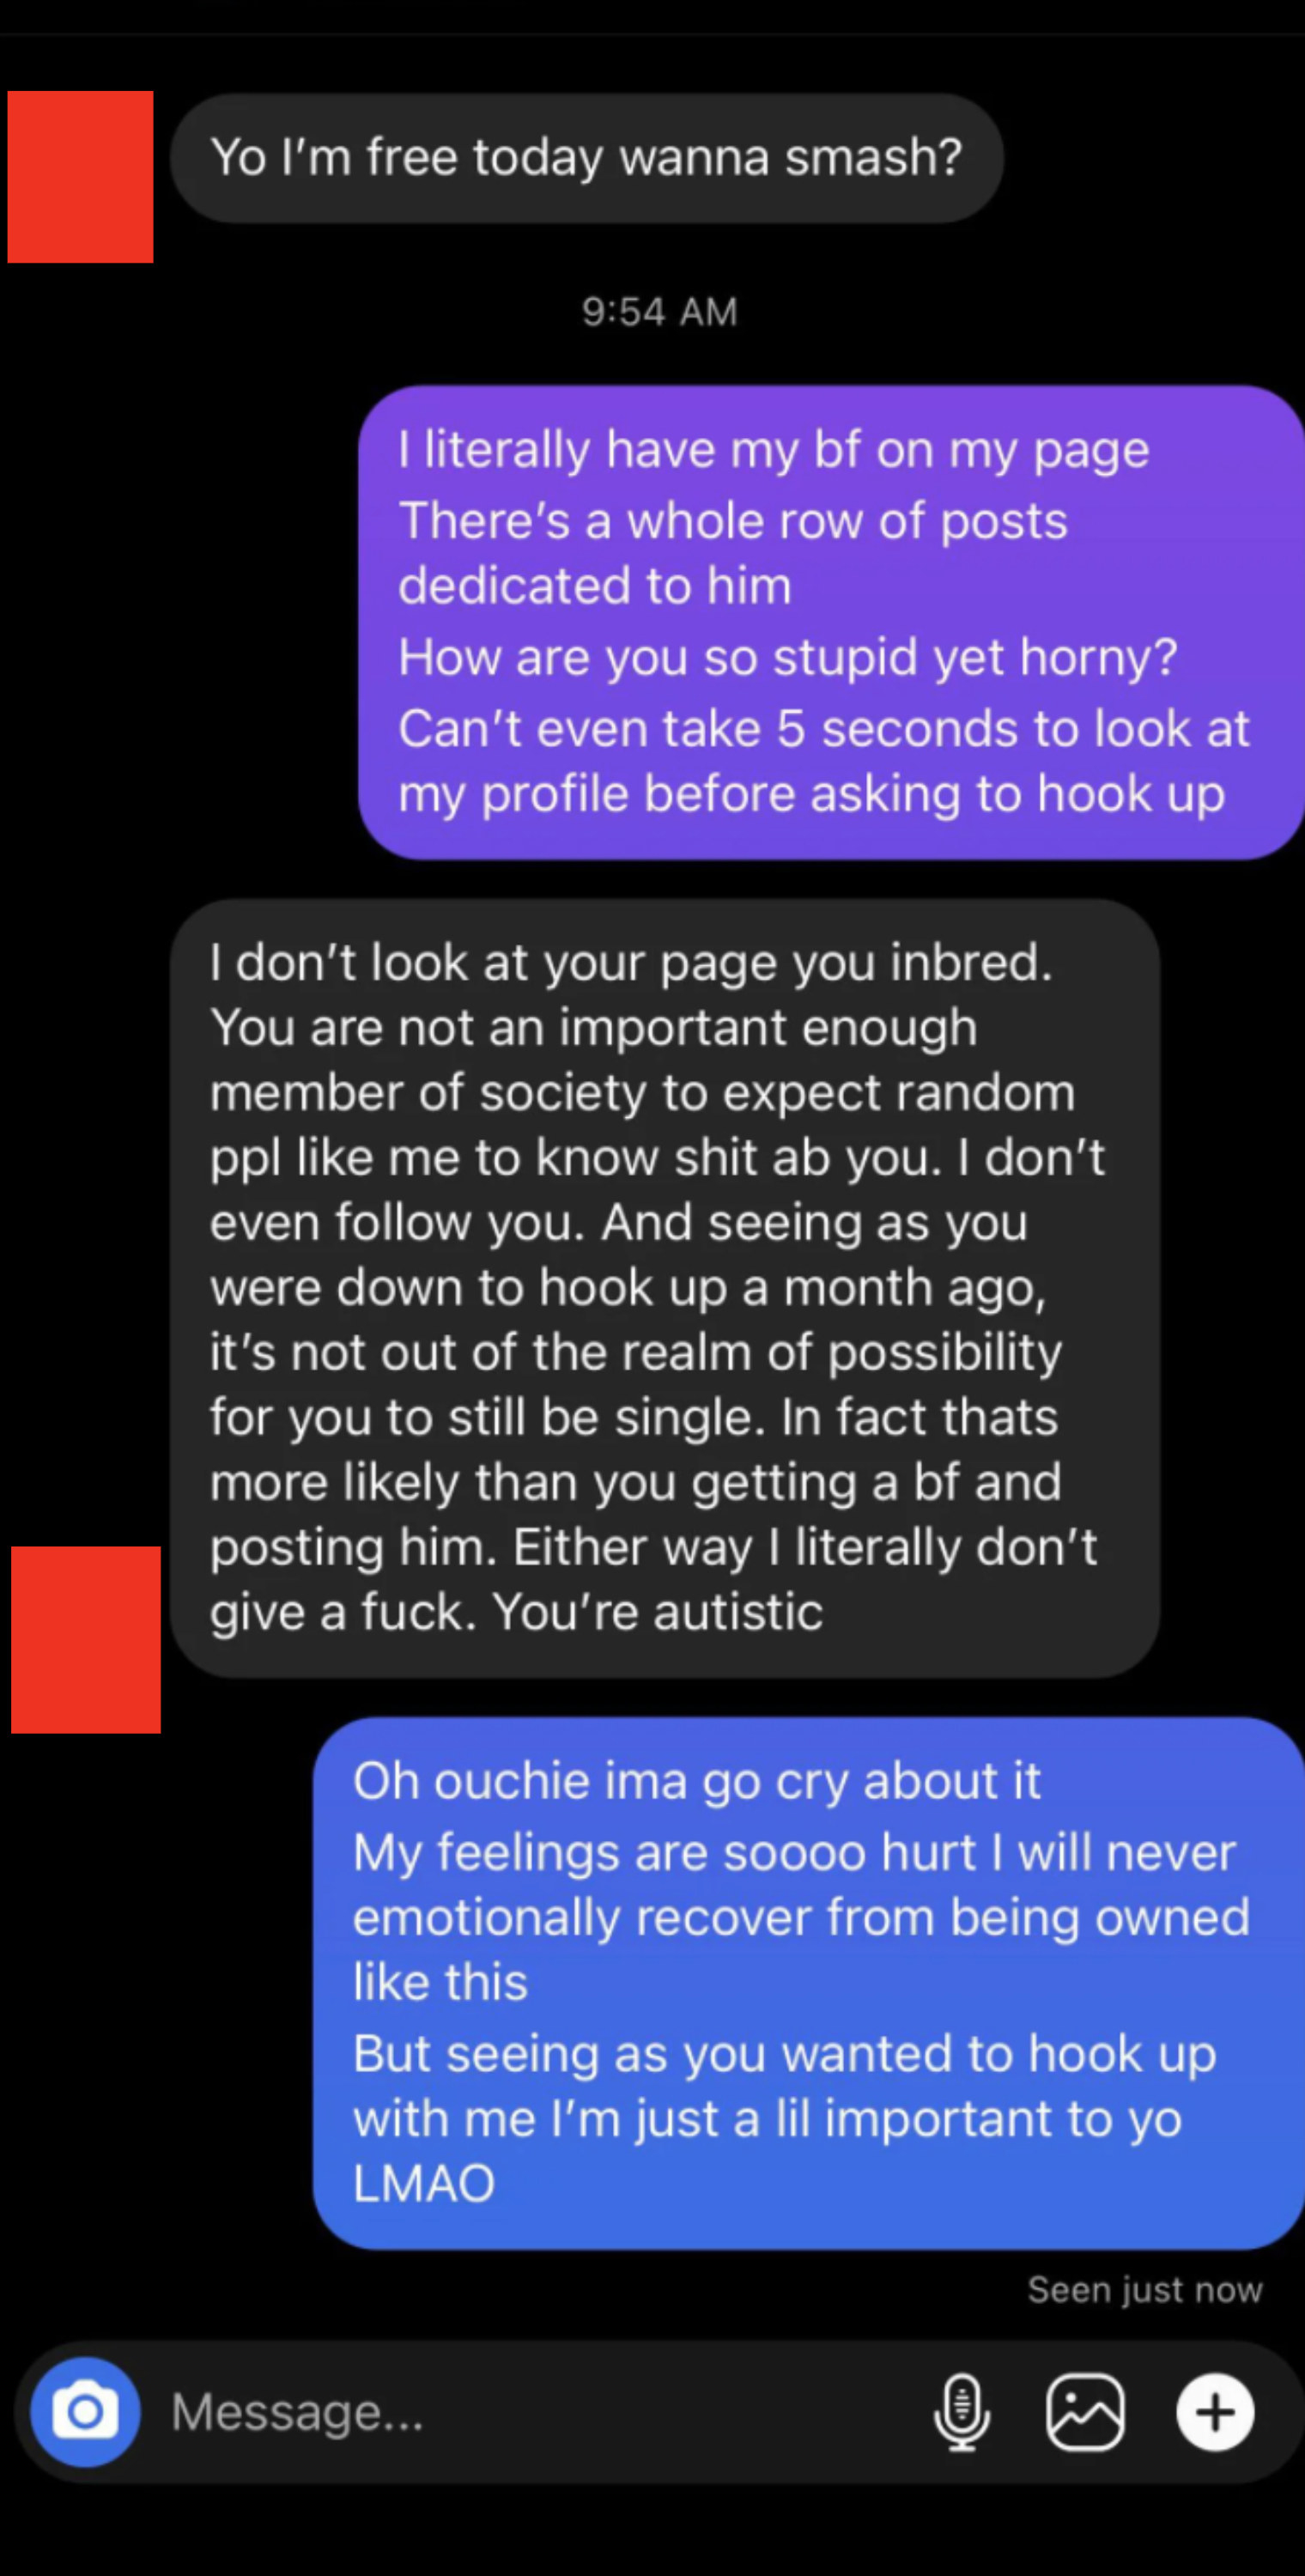 &quot;Nice guy:&quot; &quot;You are not important enough member of society to expect random ppl like me to know shit ab you&quot;